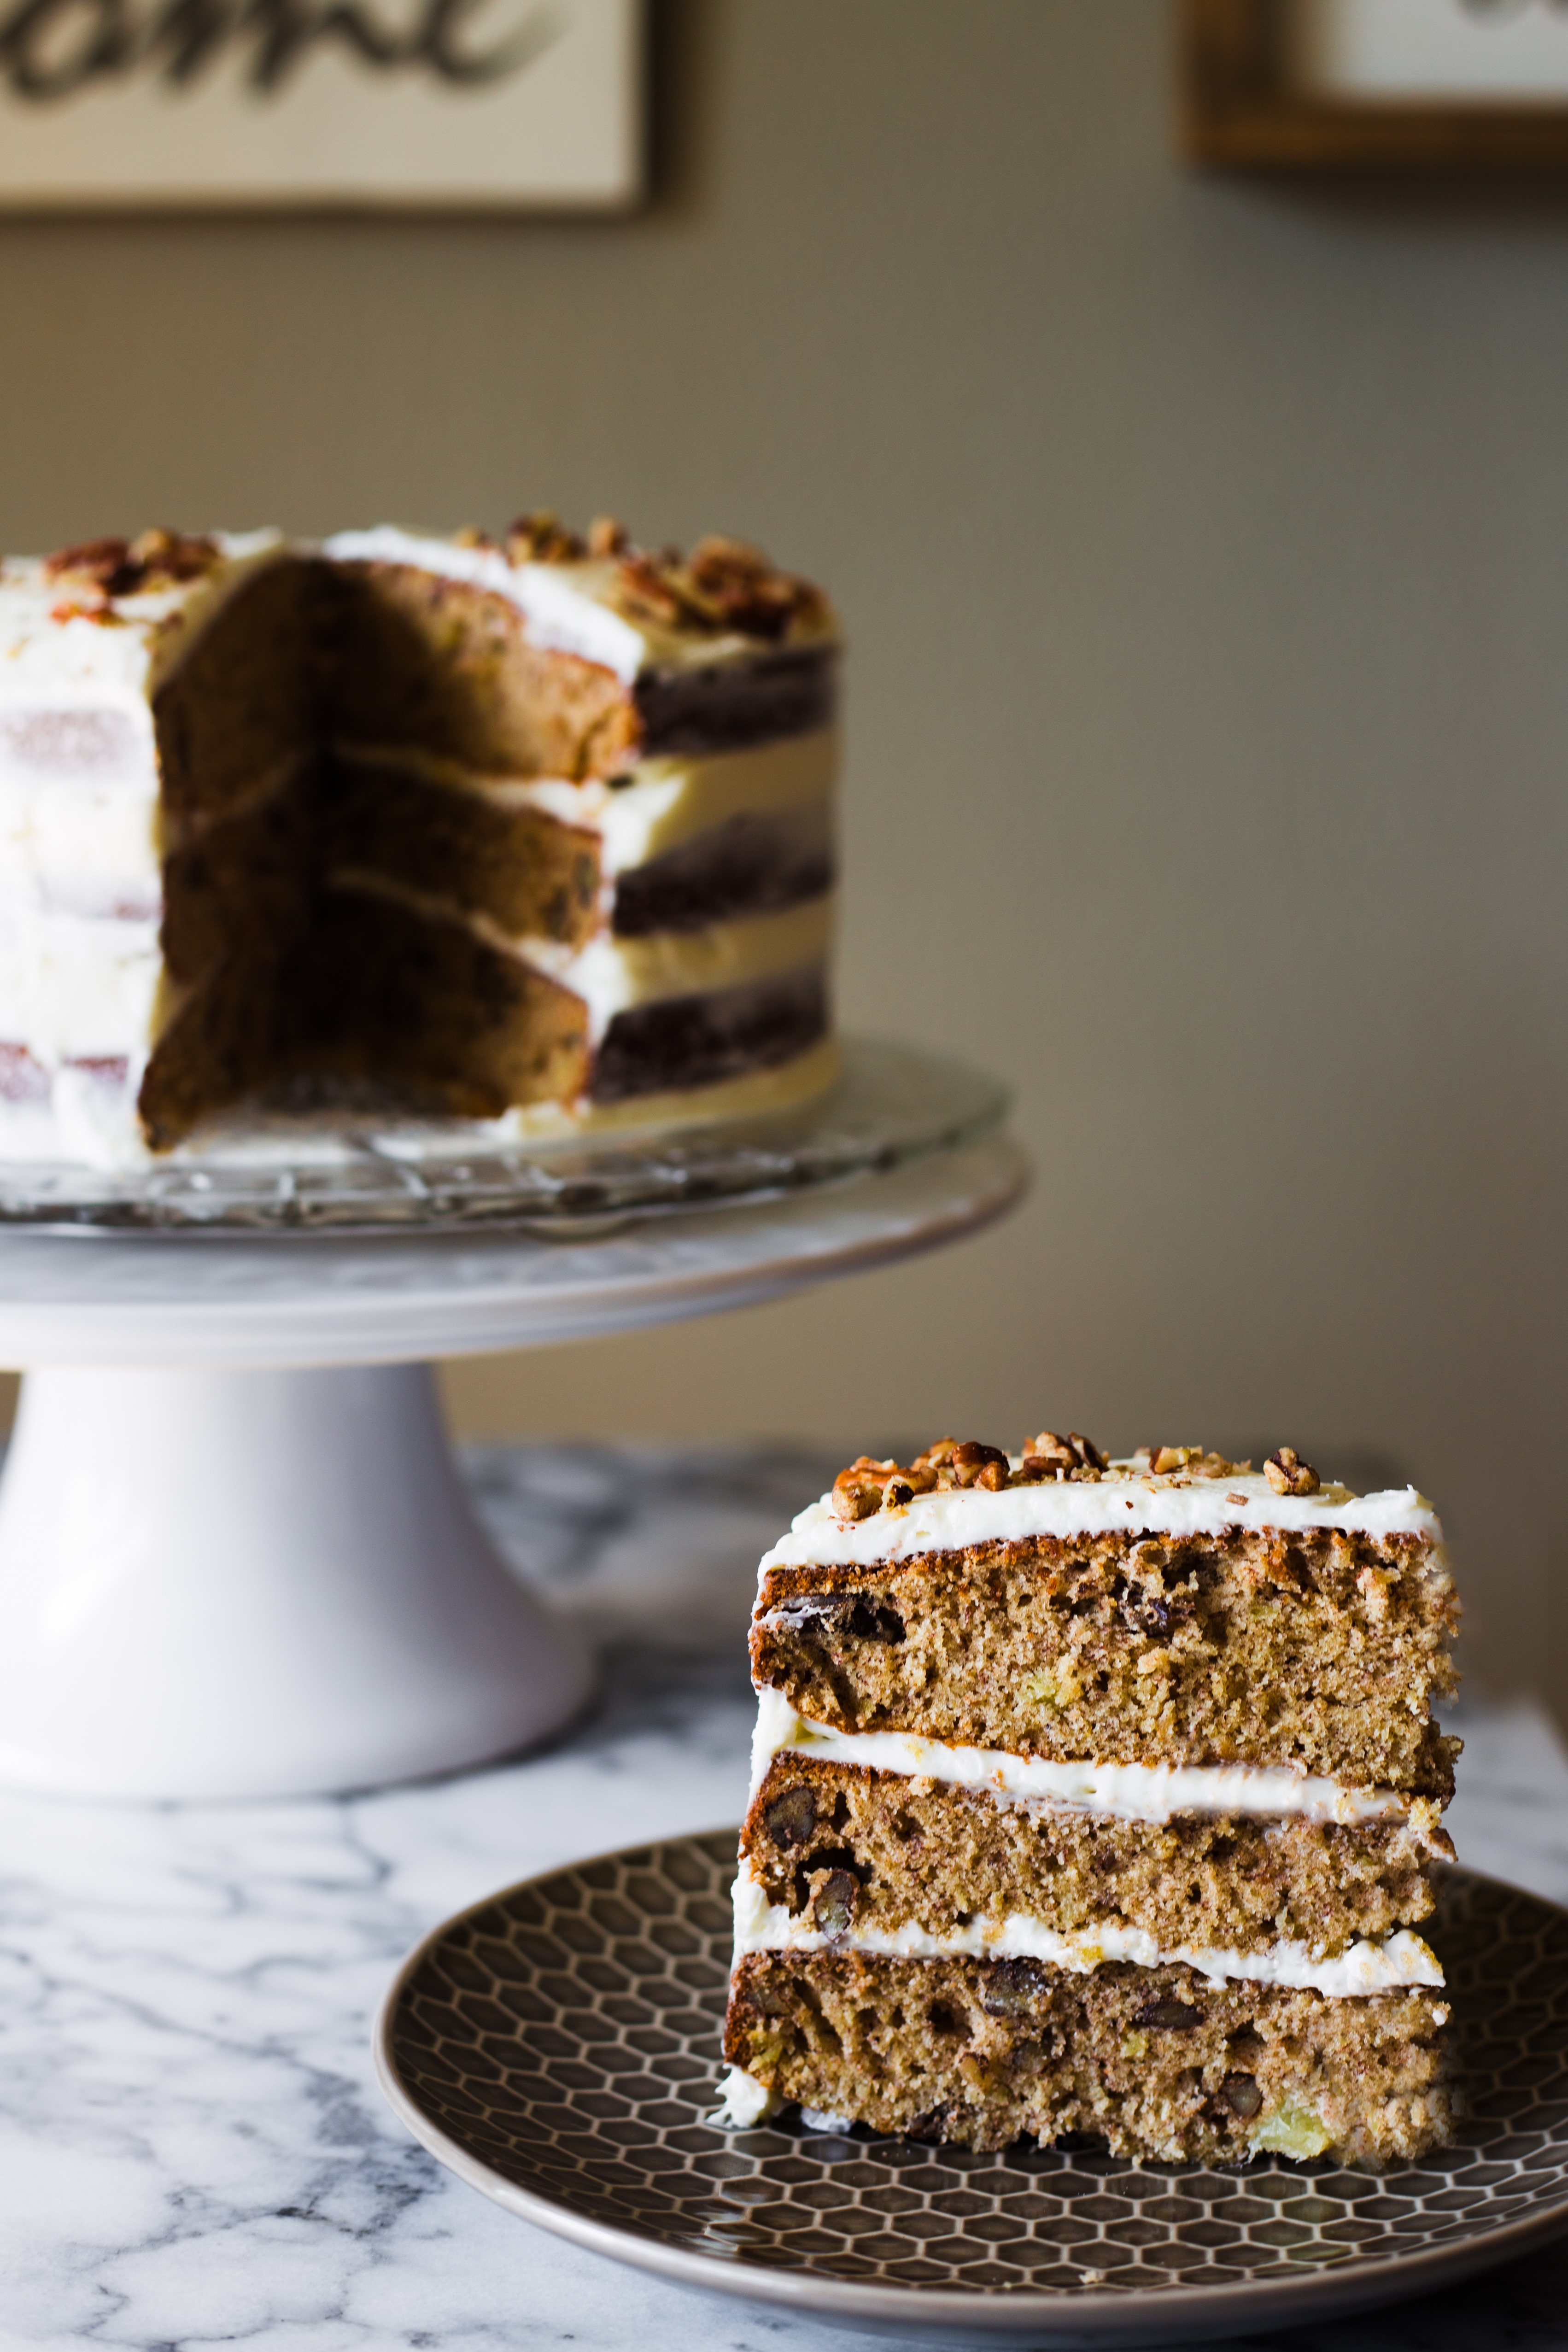 Similar in taste to carrot cake or spice cake, this Hummingbird Cake combines traditional and tropical flavors like banana and pineapple and is topped off with a classic buttercream frosting. 